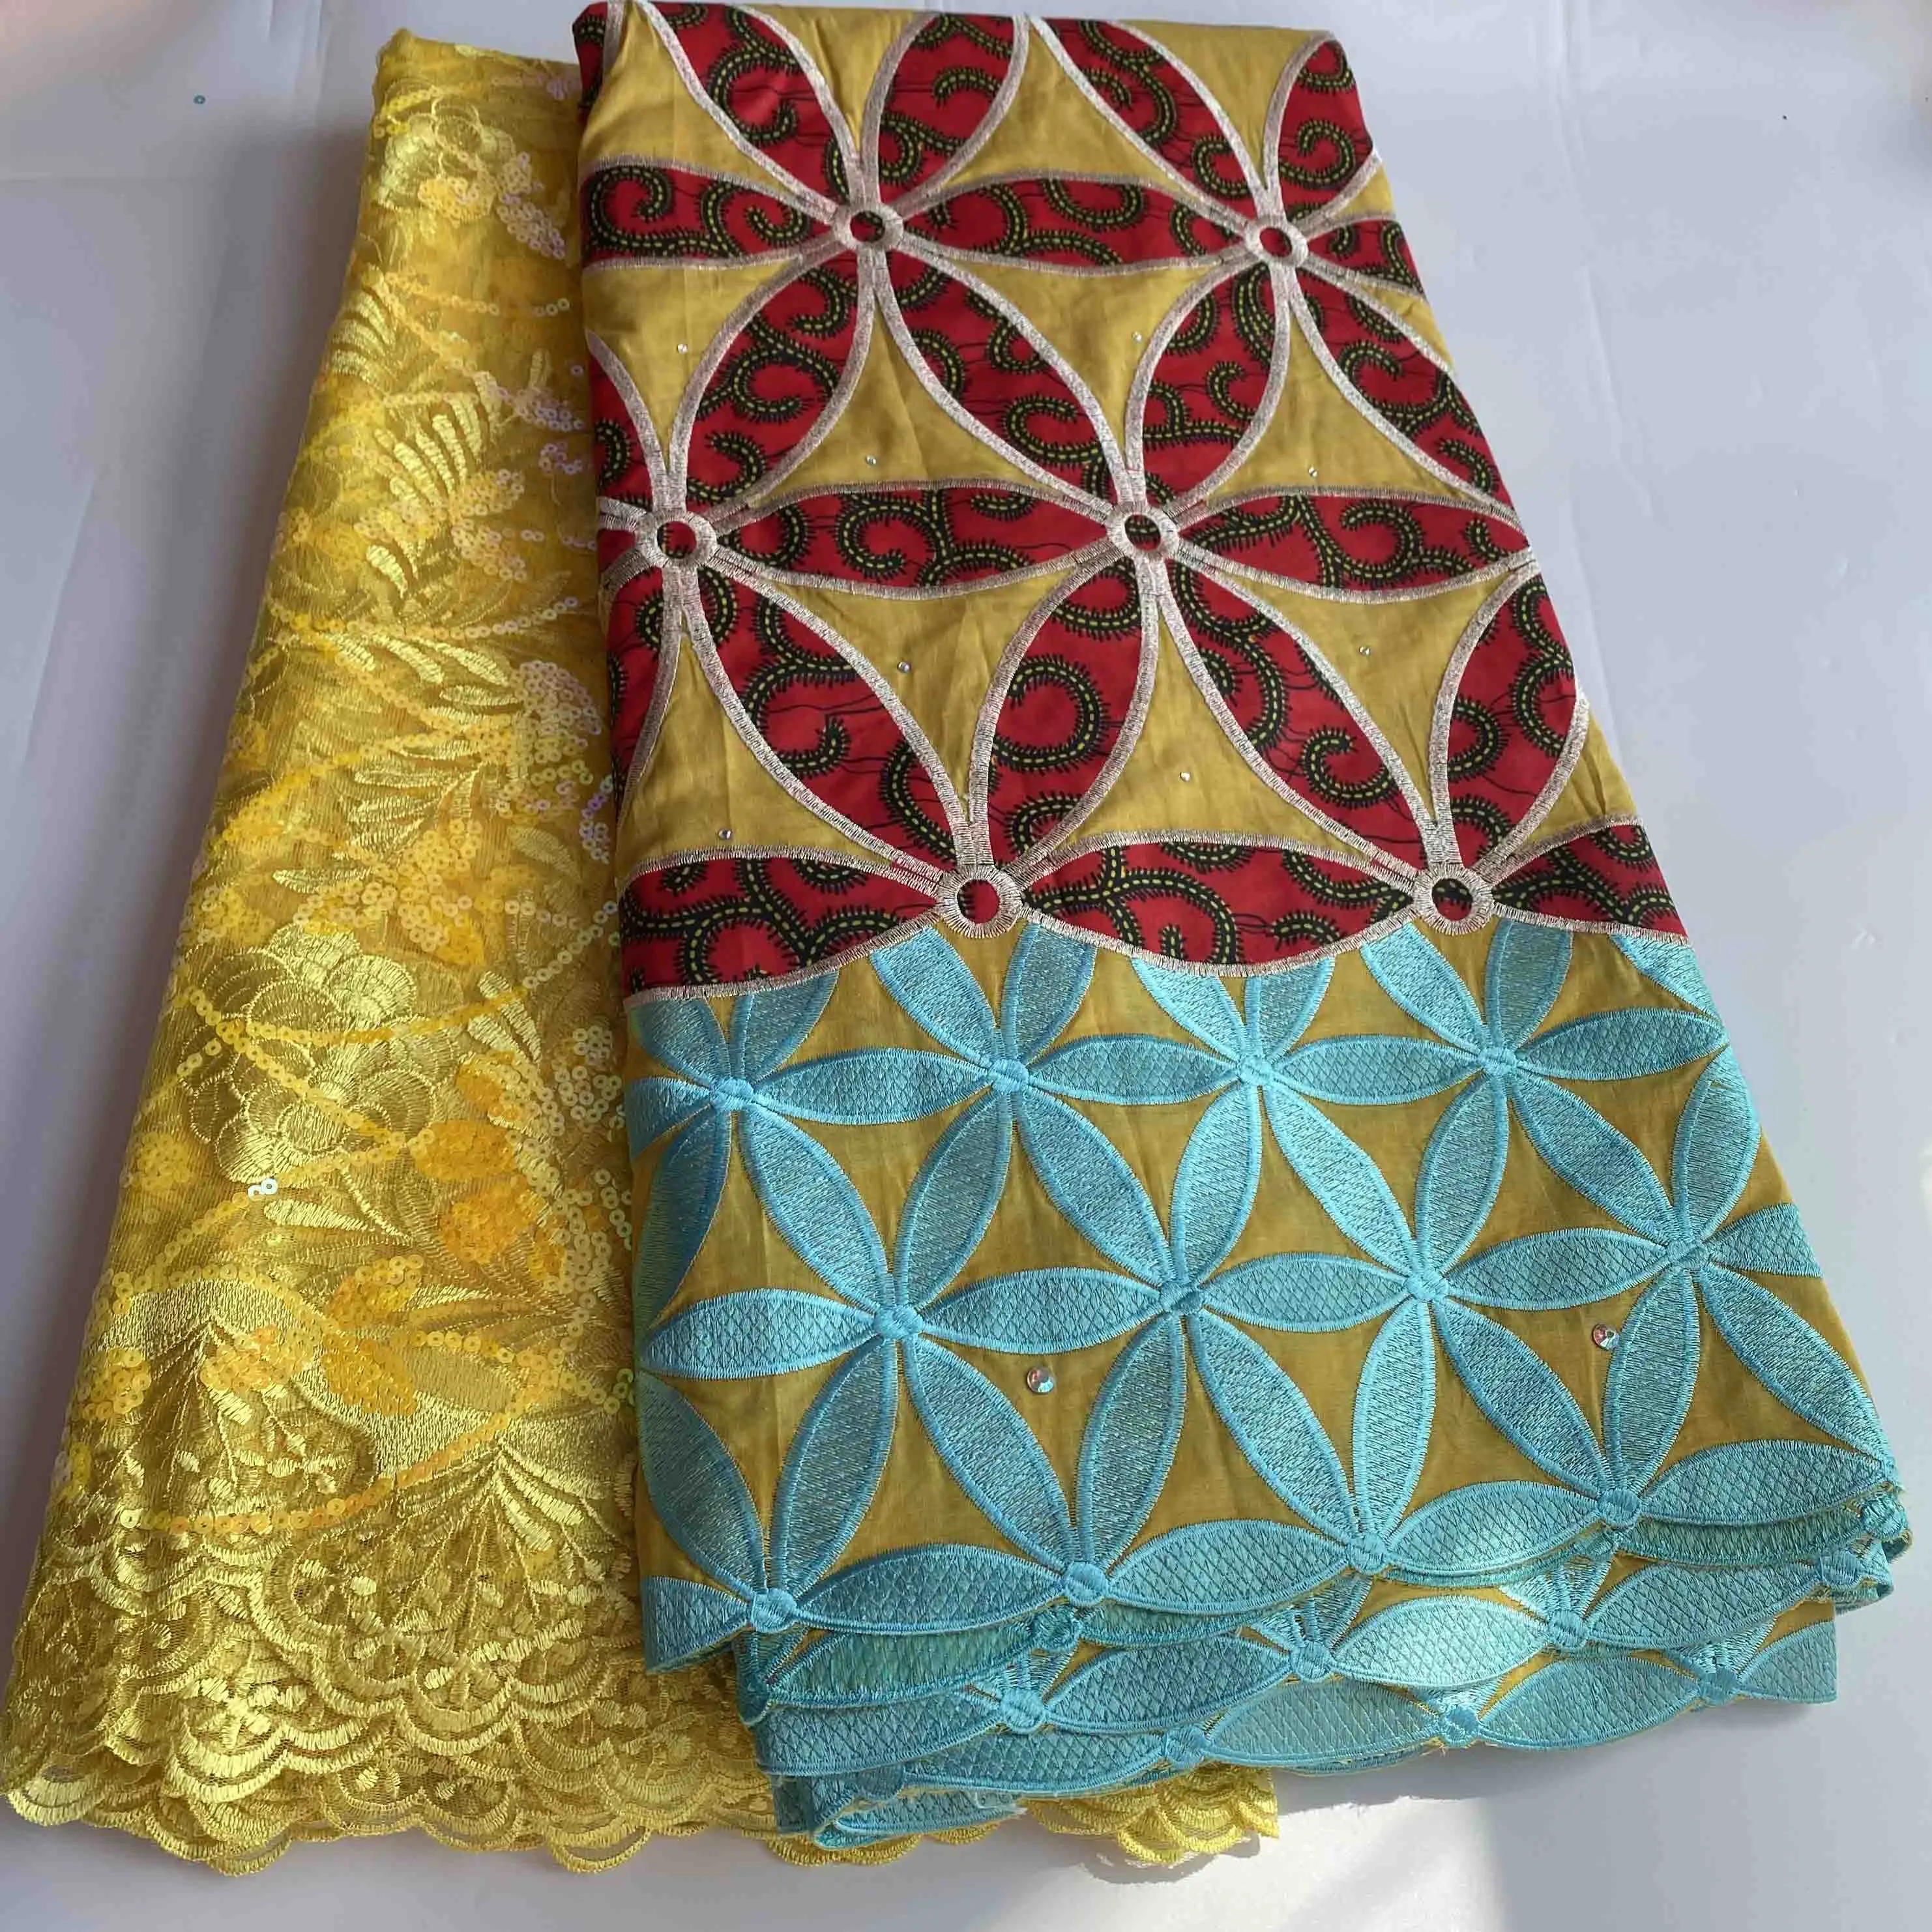 

2021 New coming cotton African Embroidery Heavy Cotton Big Swiss Voile Lace Fabric Austria With Stones, Peach,teal